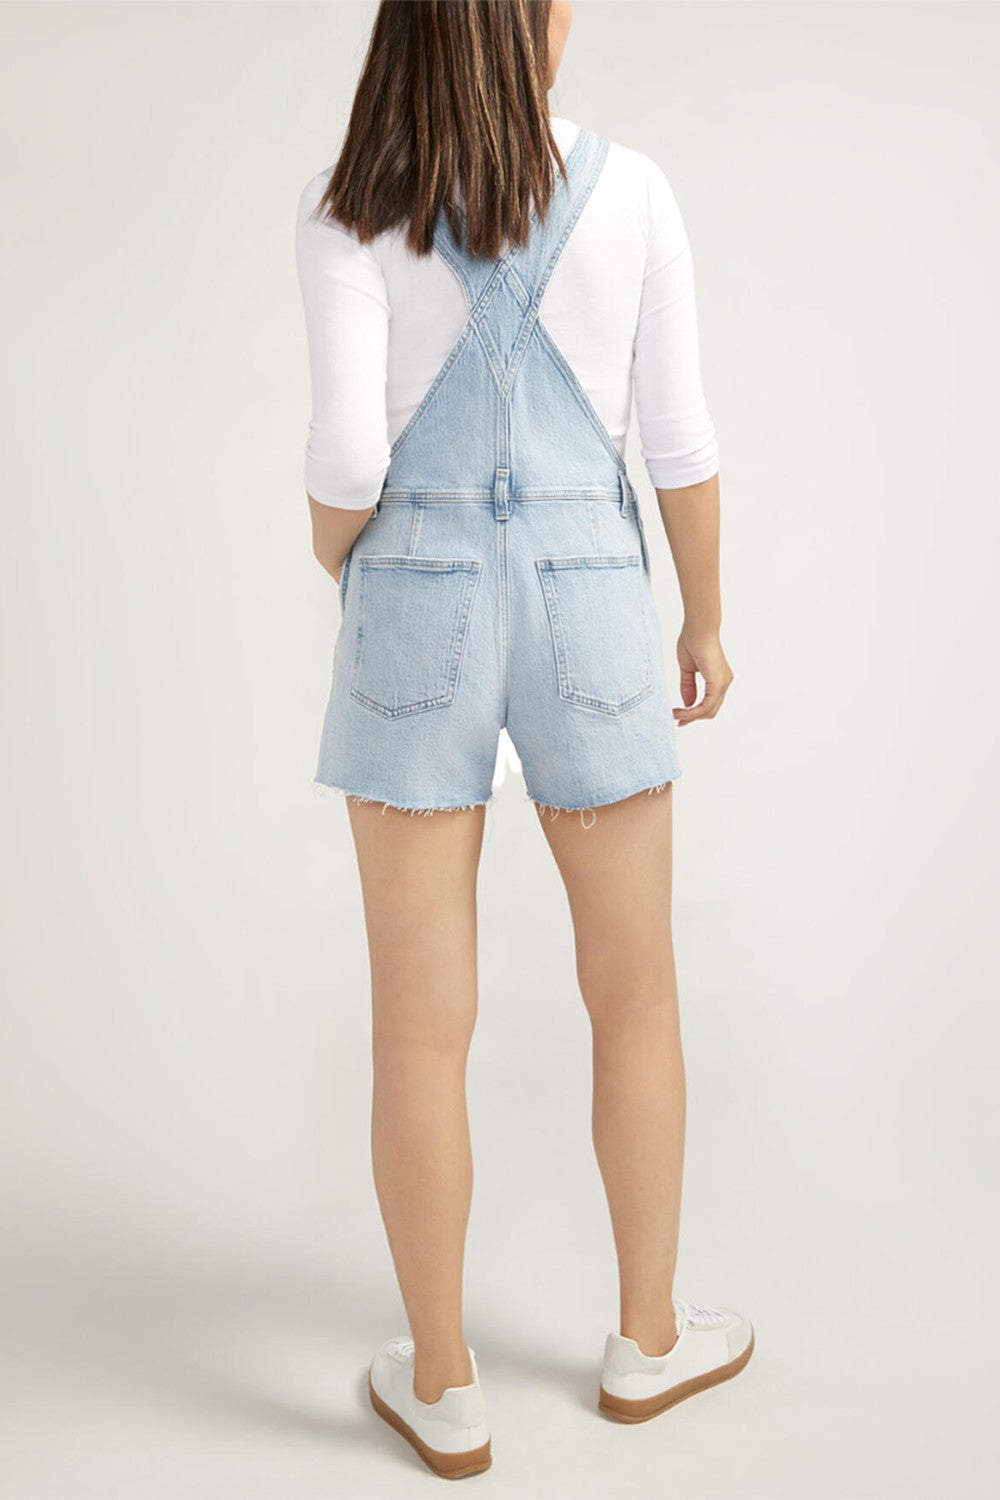 Get into a 70's vibe in a comfortably fitted shortall with vintage-inspired details and light distressing. A light indigo wash sets the perfect tone for spring, adjustable shoulder straps and an open back makes it easy to pair with your favourite tees.